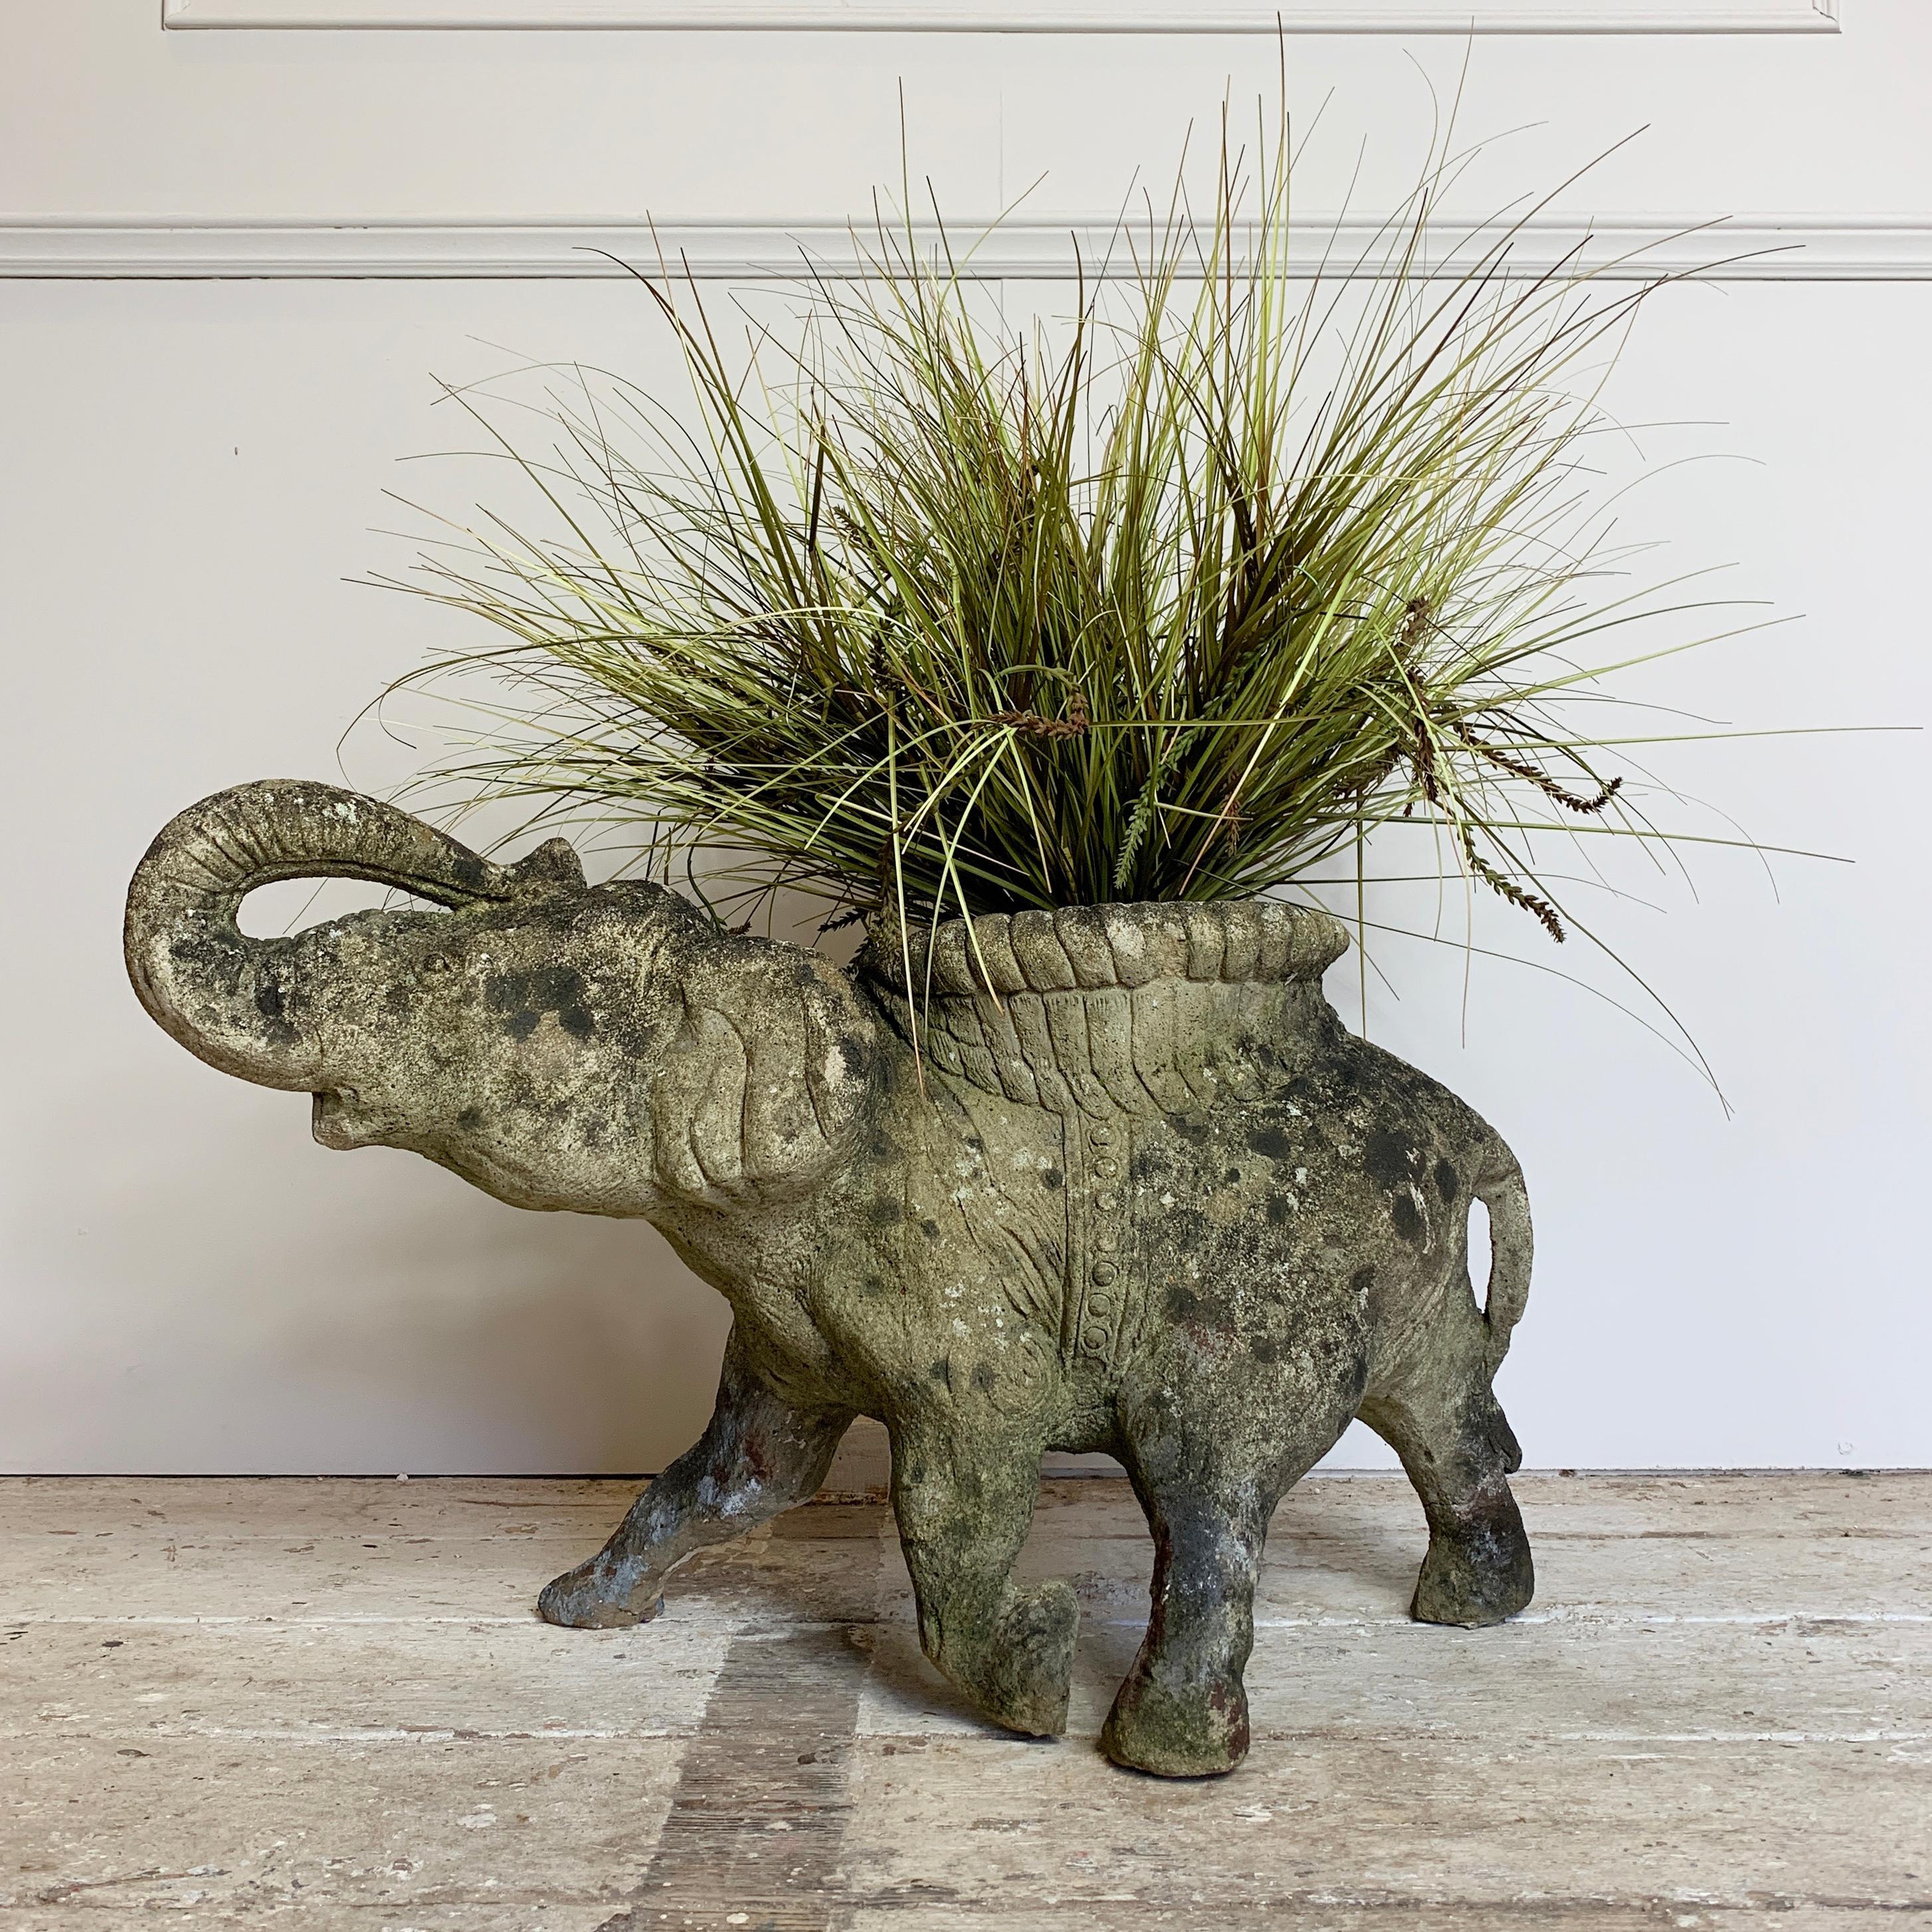 Late Victorian/ early Edwardian Indian stone elephant planter. English. Very early 20th century. Fabulous elephant with 'Howdah' seat design for a planter. Very detailed patterns to the body, facial features and skin. The elephant stands on 4 legs,